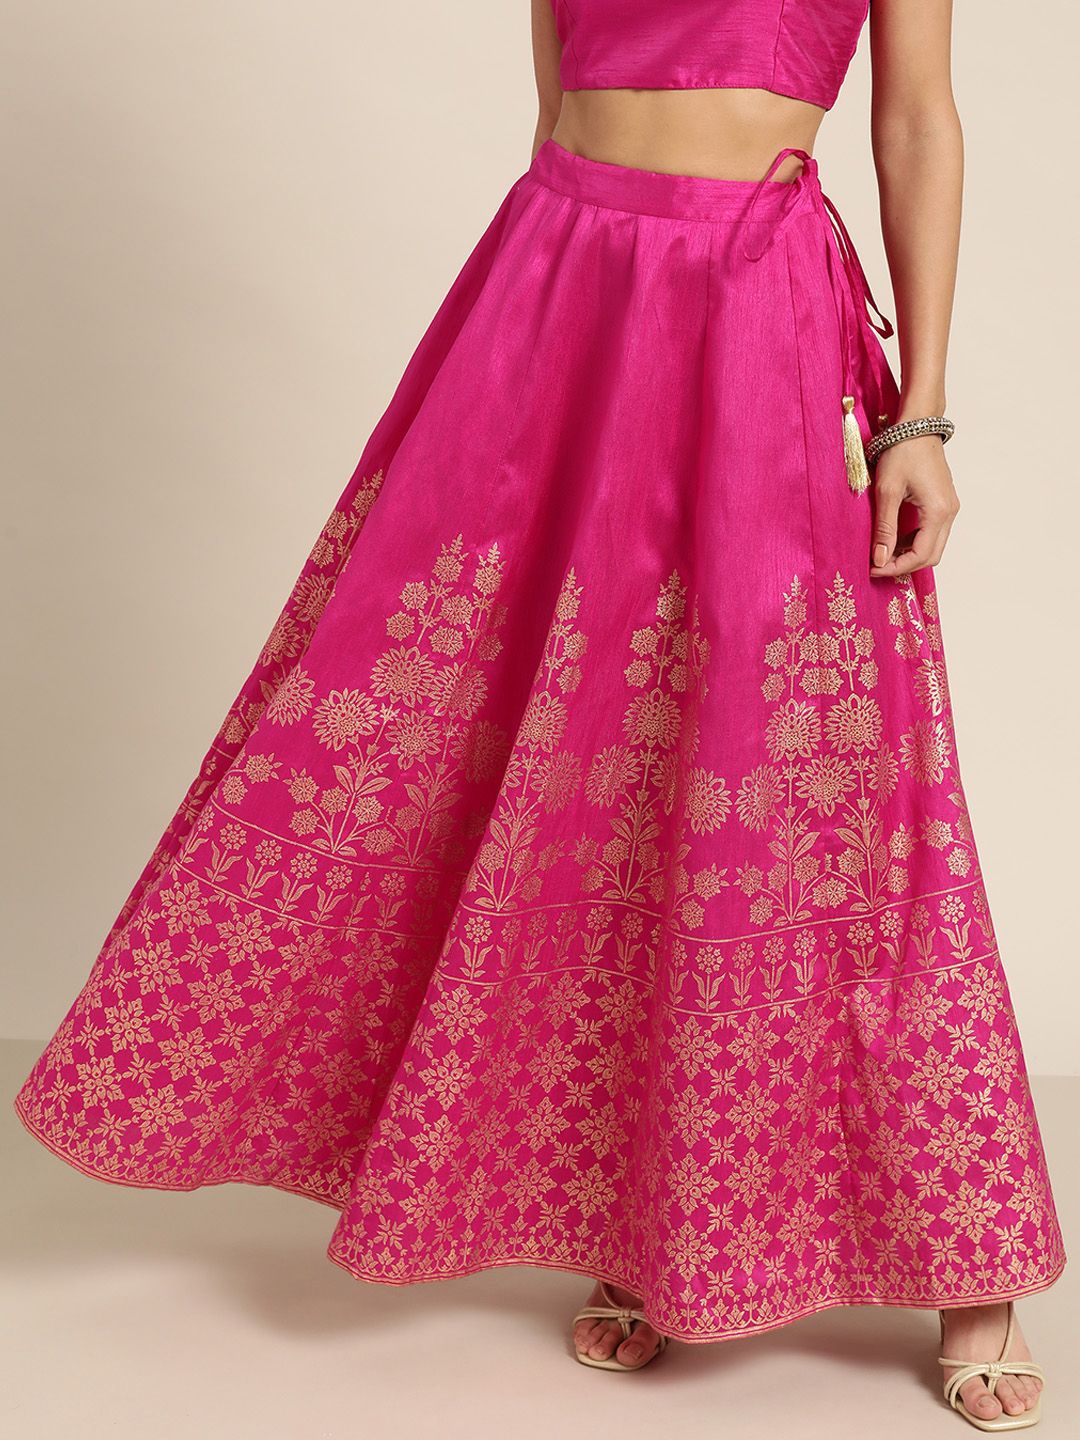 Shae by SASSAFRAS Pink & Golden Foil Print Flared Maxi Skirt Price in India